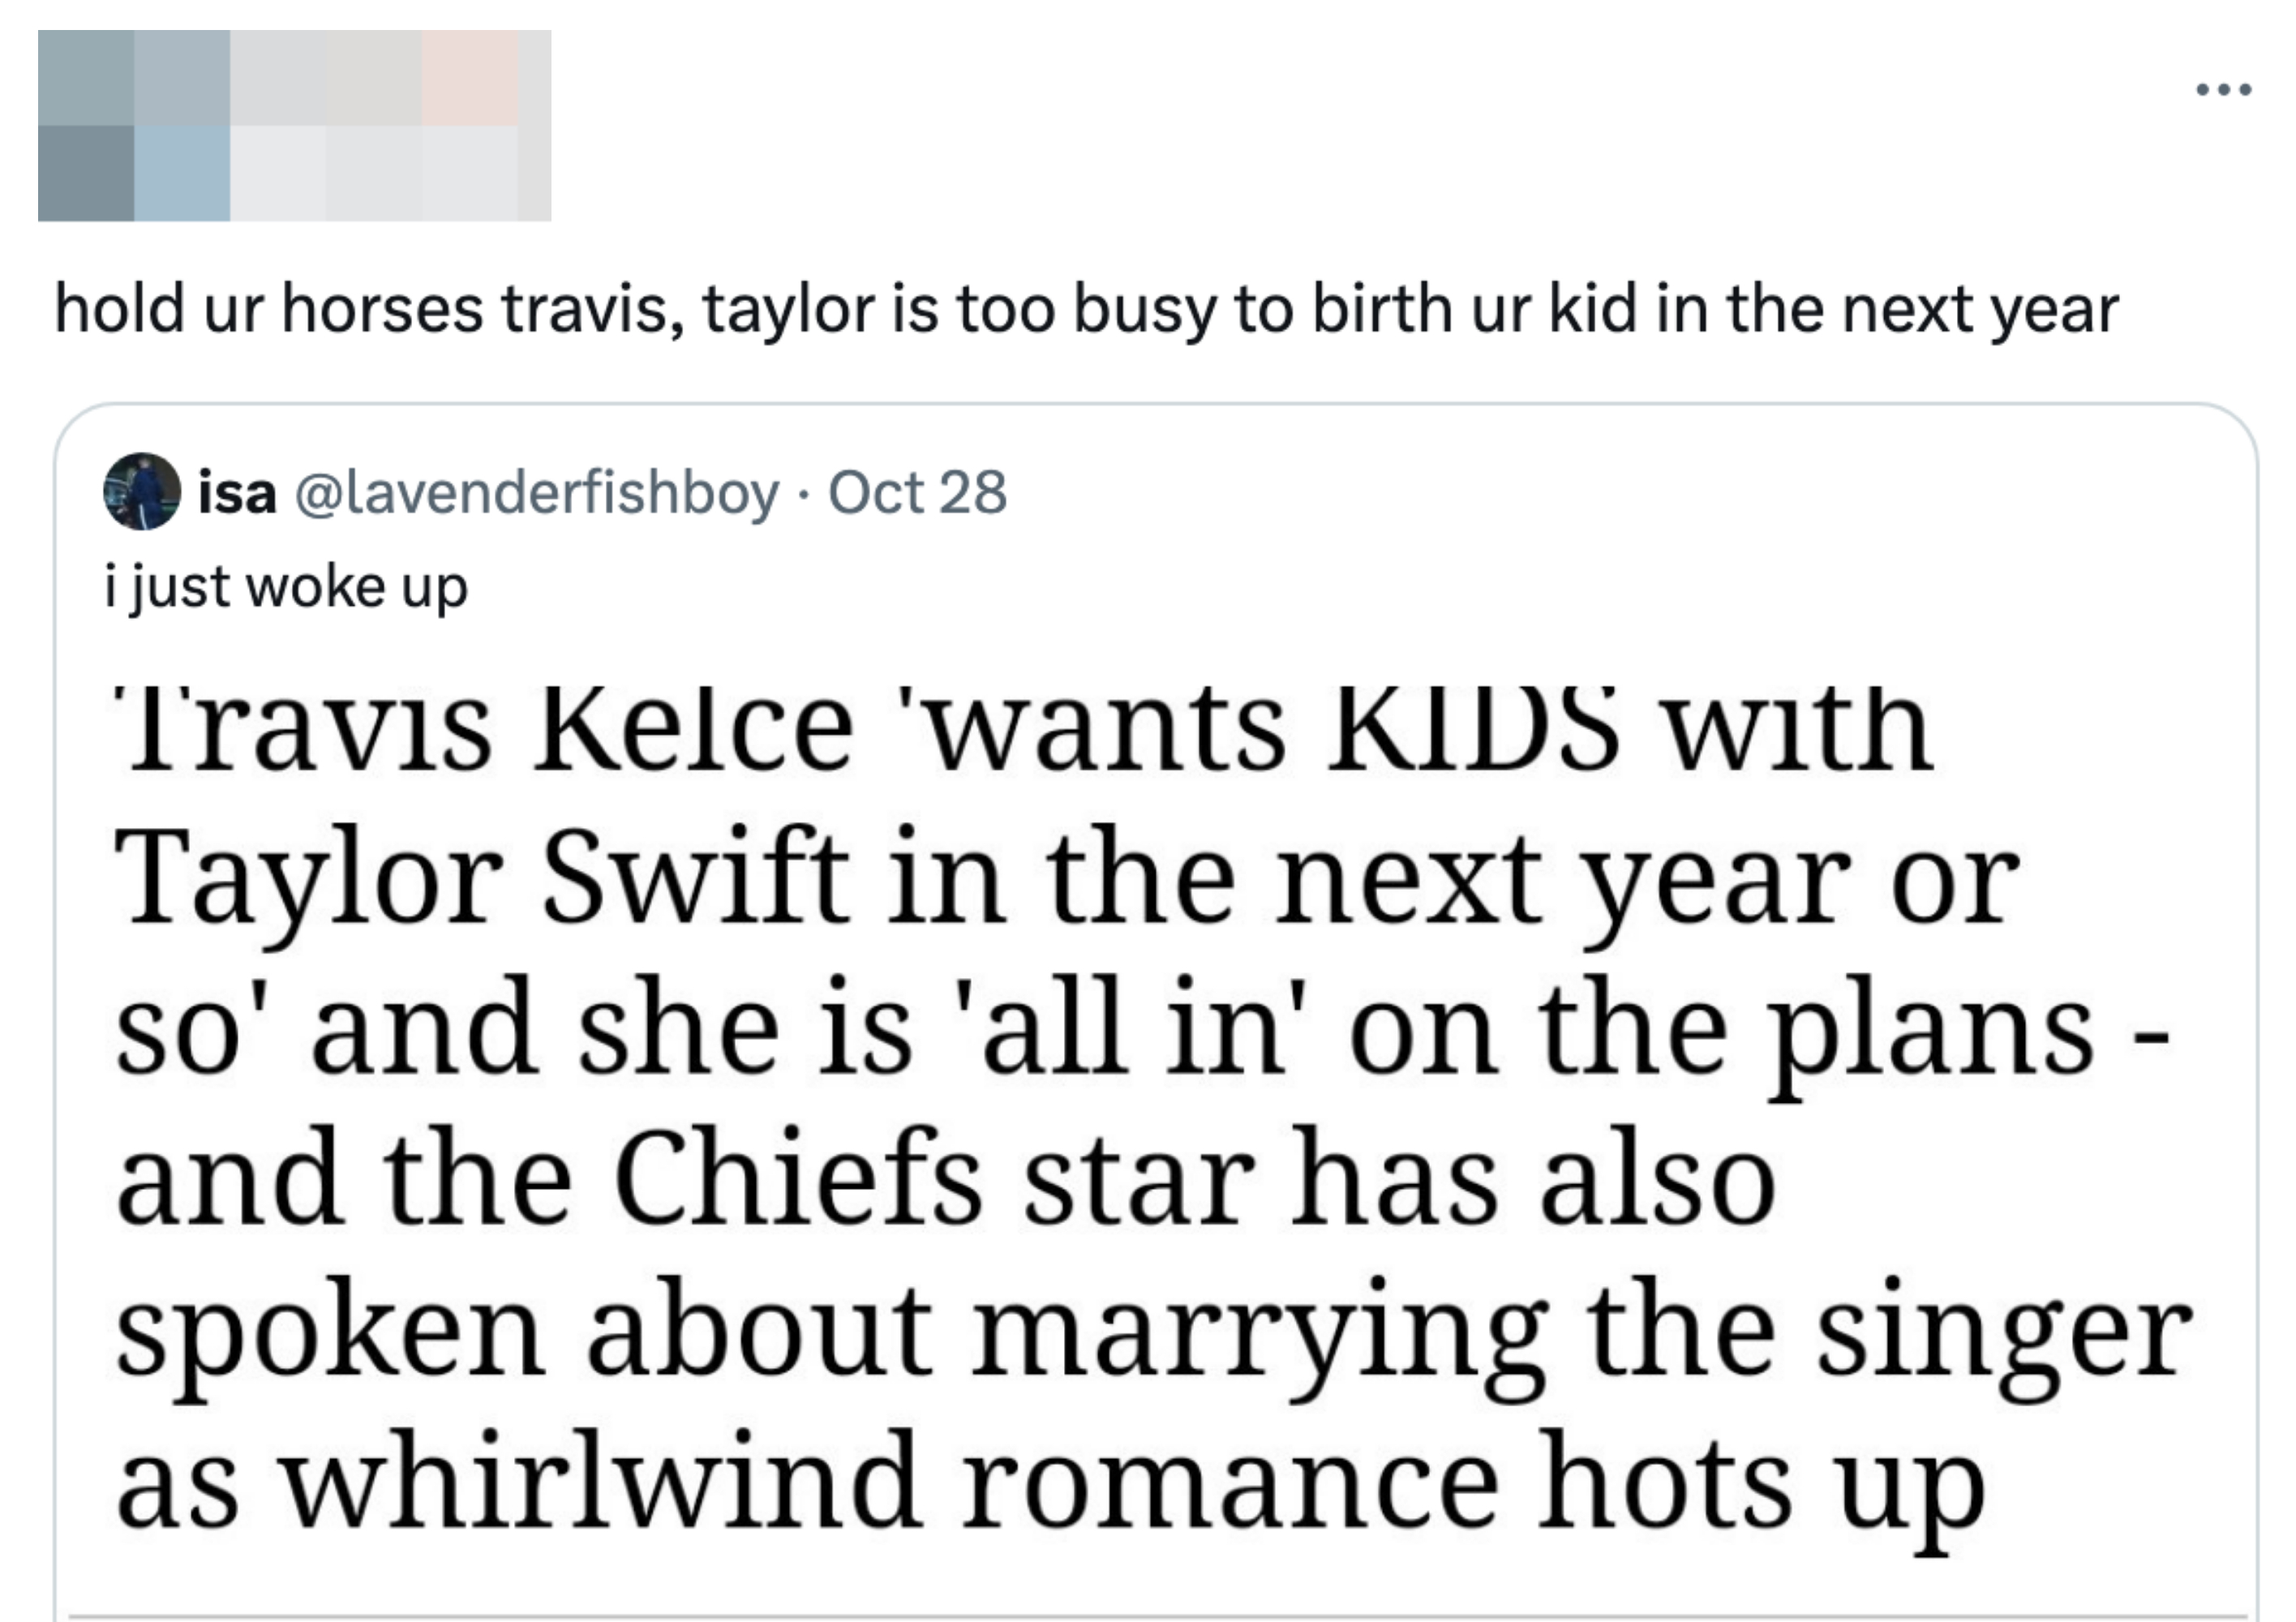 Comment: hold ur horses travis, taylor is too busy to birth ur kid in the next year